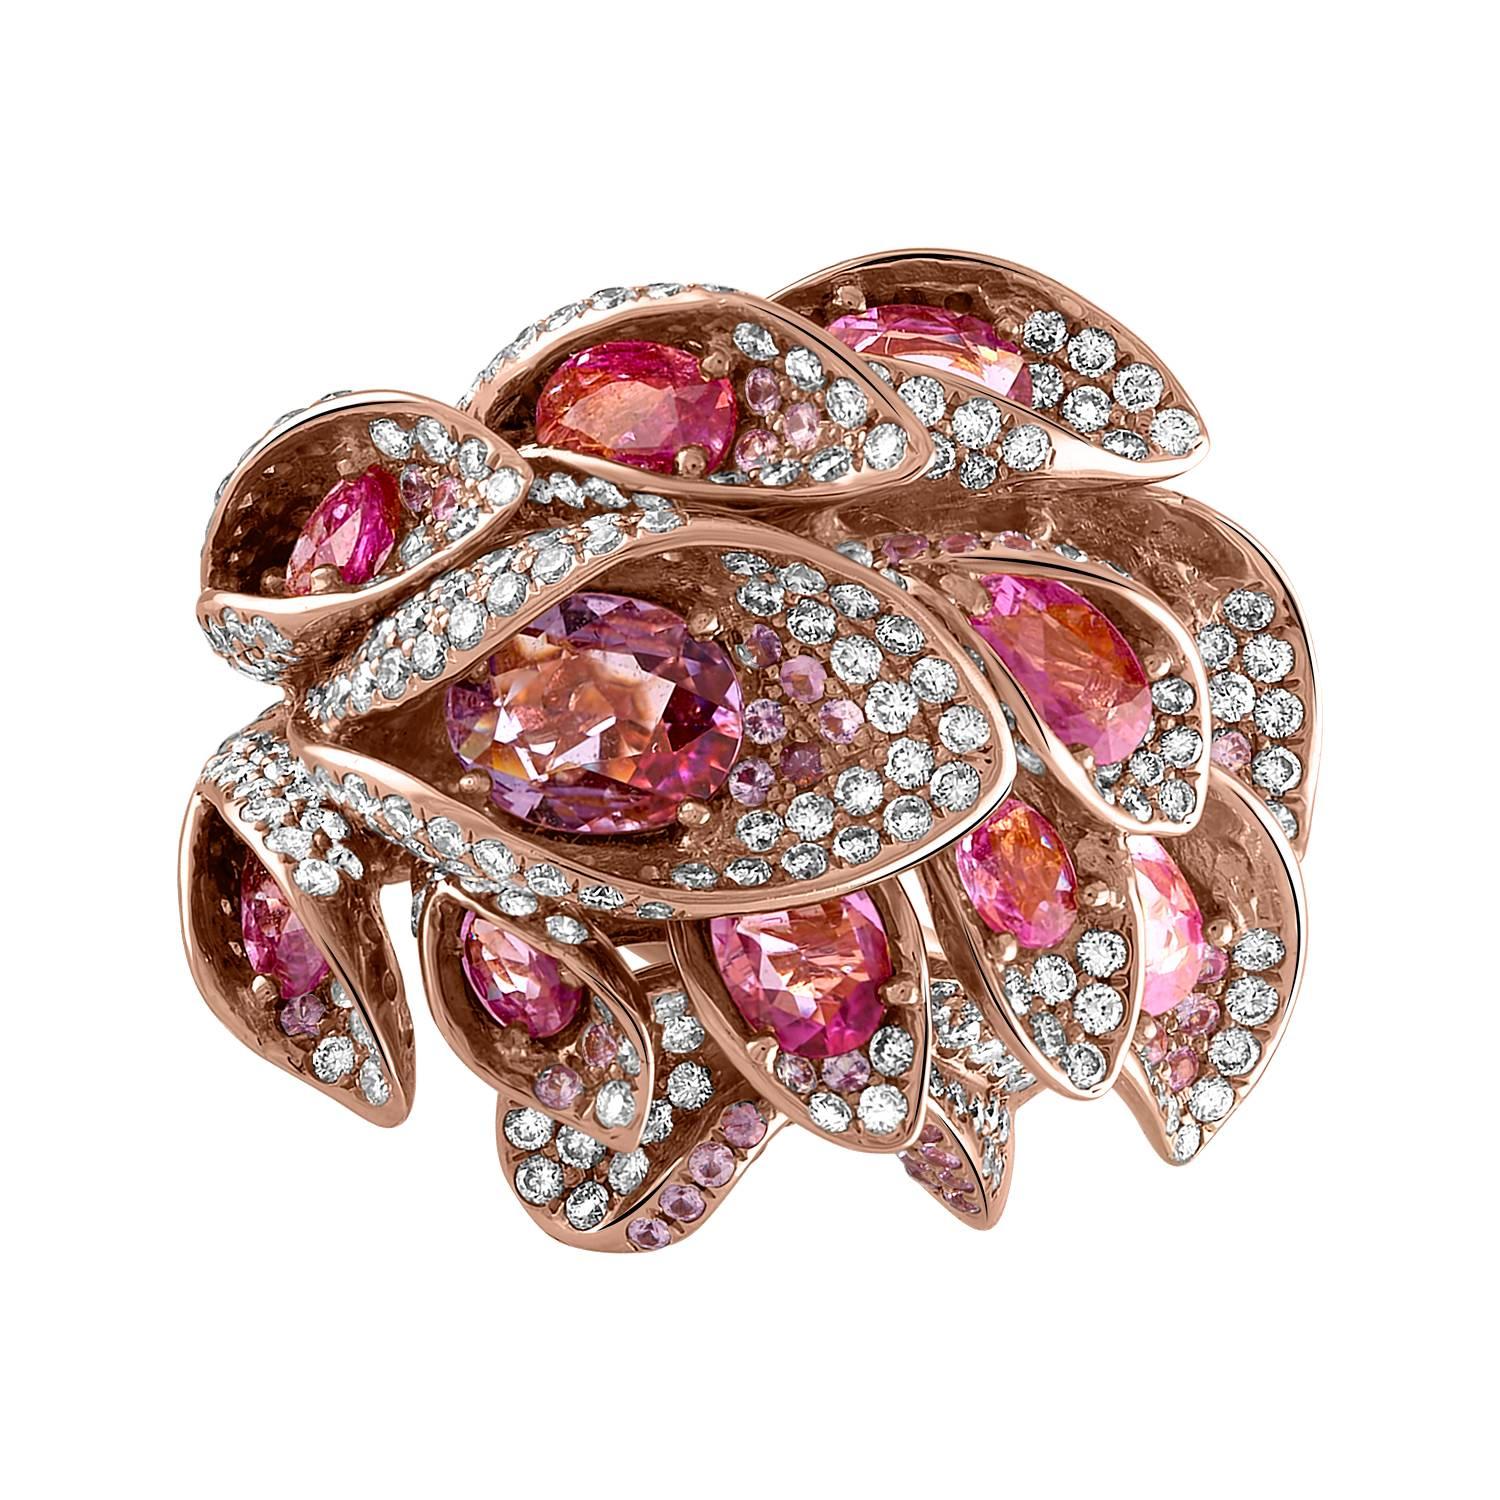 18 Karat Rose Gold, Diamond and 6.61 Carat Pink Sapphire Flower Cocktail Ring For Sale